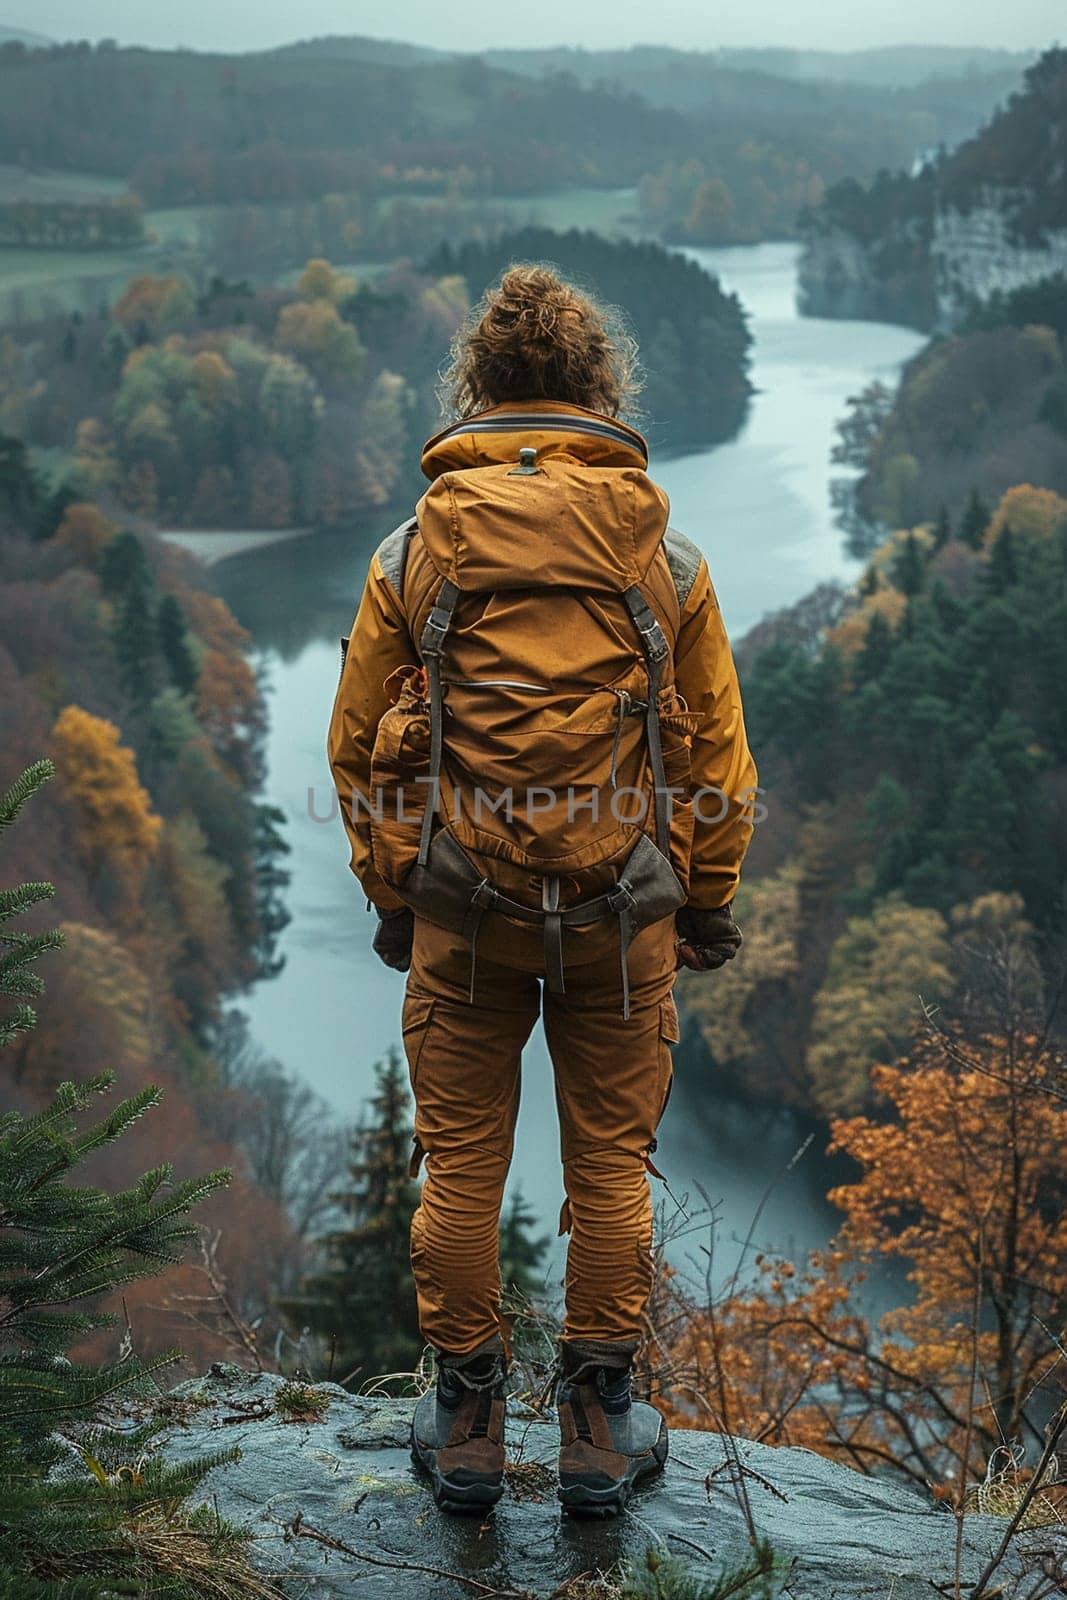 Backpacker standing at a scenic overlook, capturing the spirit of travel and discovery.